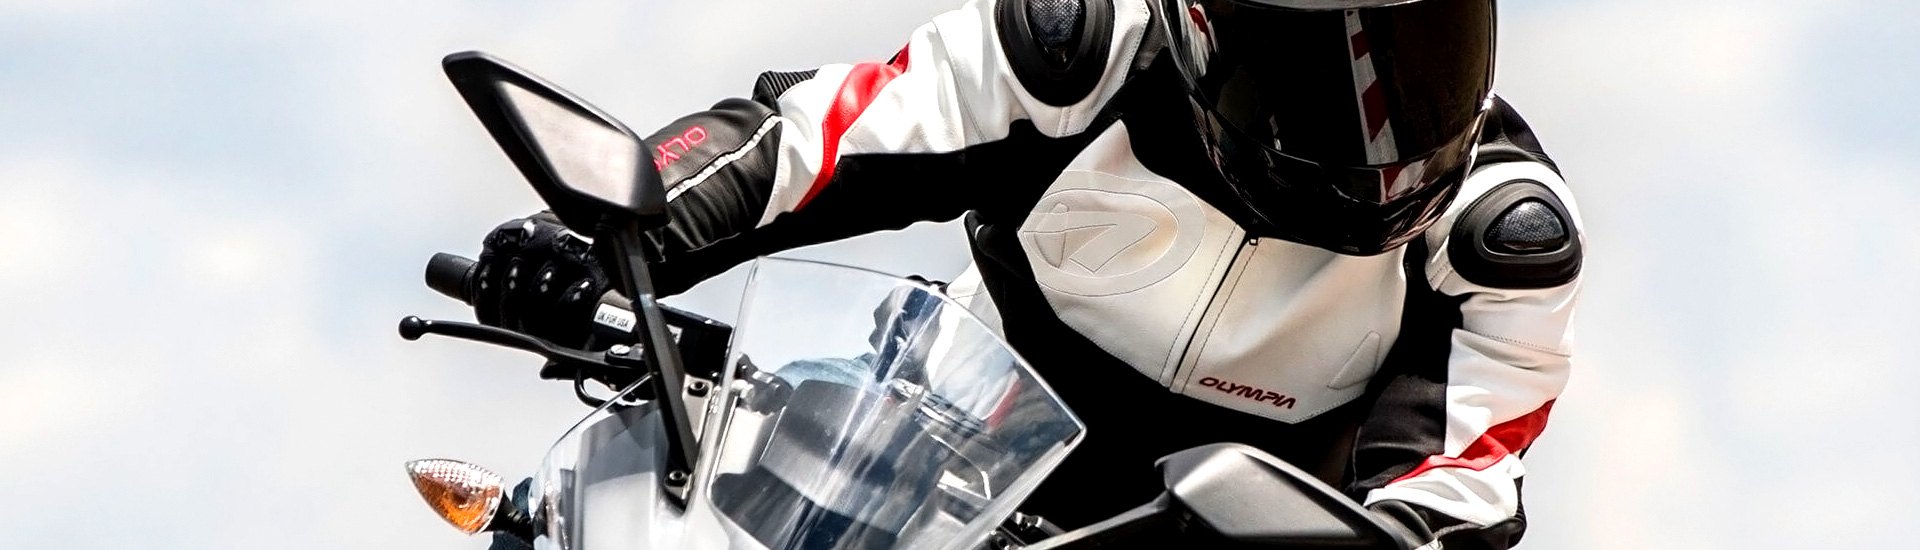 New to Riding? What Are Your Best Choices In Motorcycle Riding Gear?